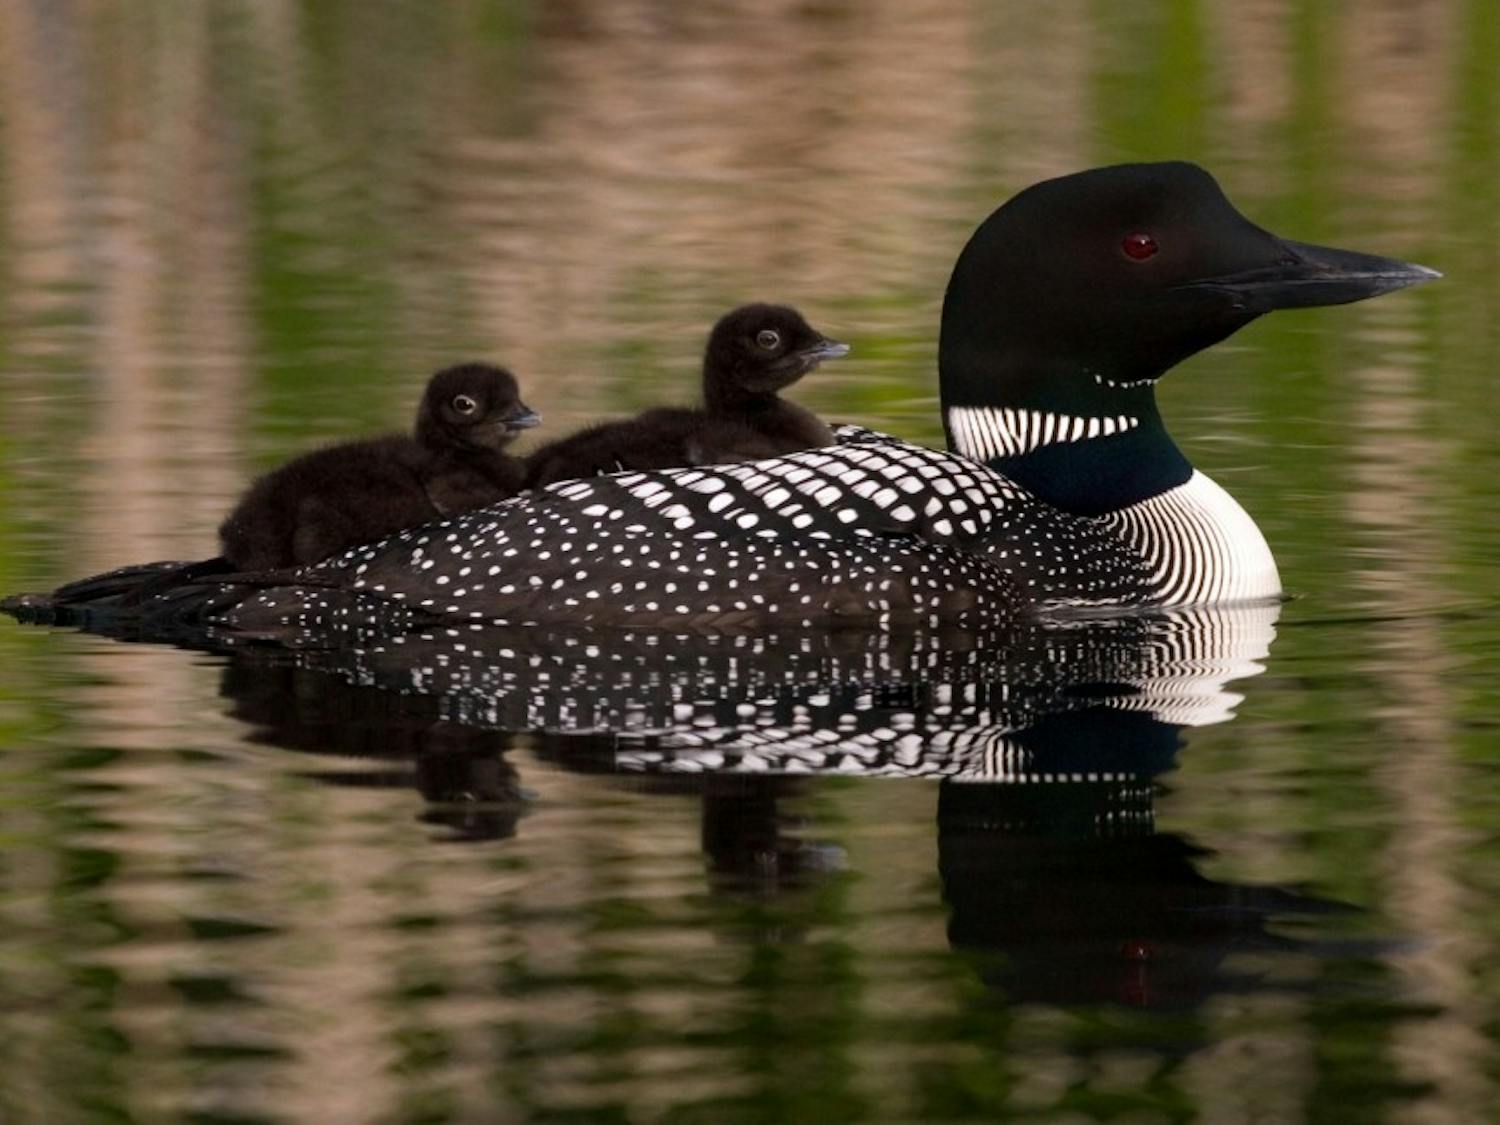 Birds in the Great Lakes area, like the loon, are at increased risk from avian botulism because of climate and ecosystem changes.